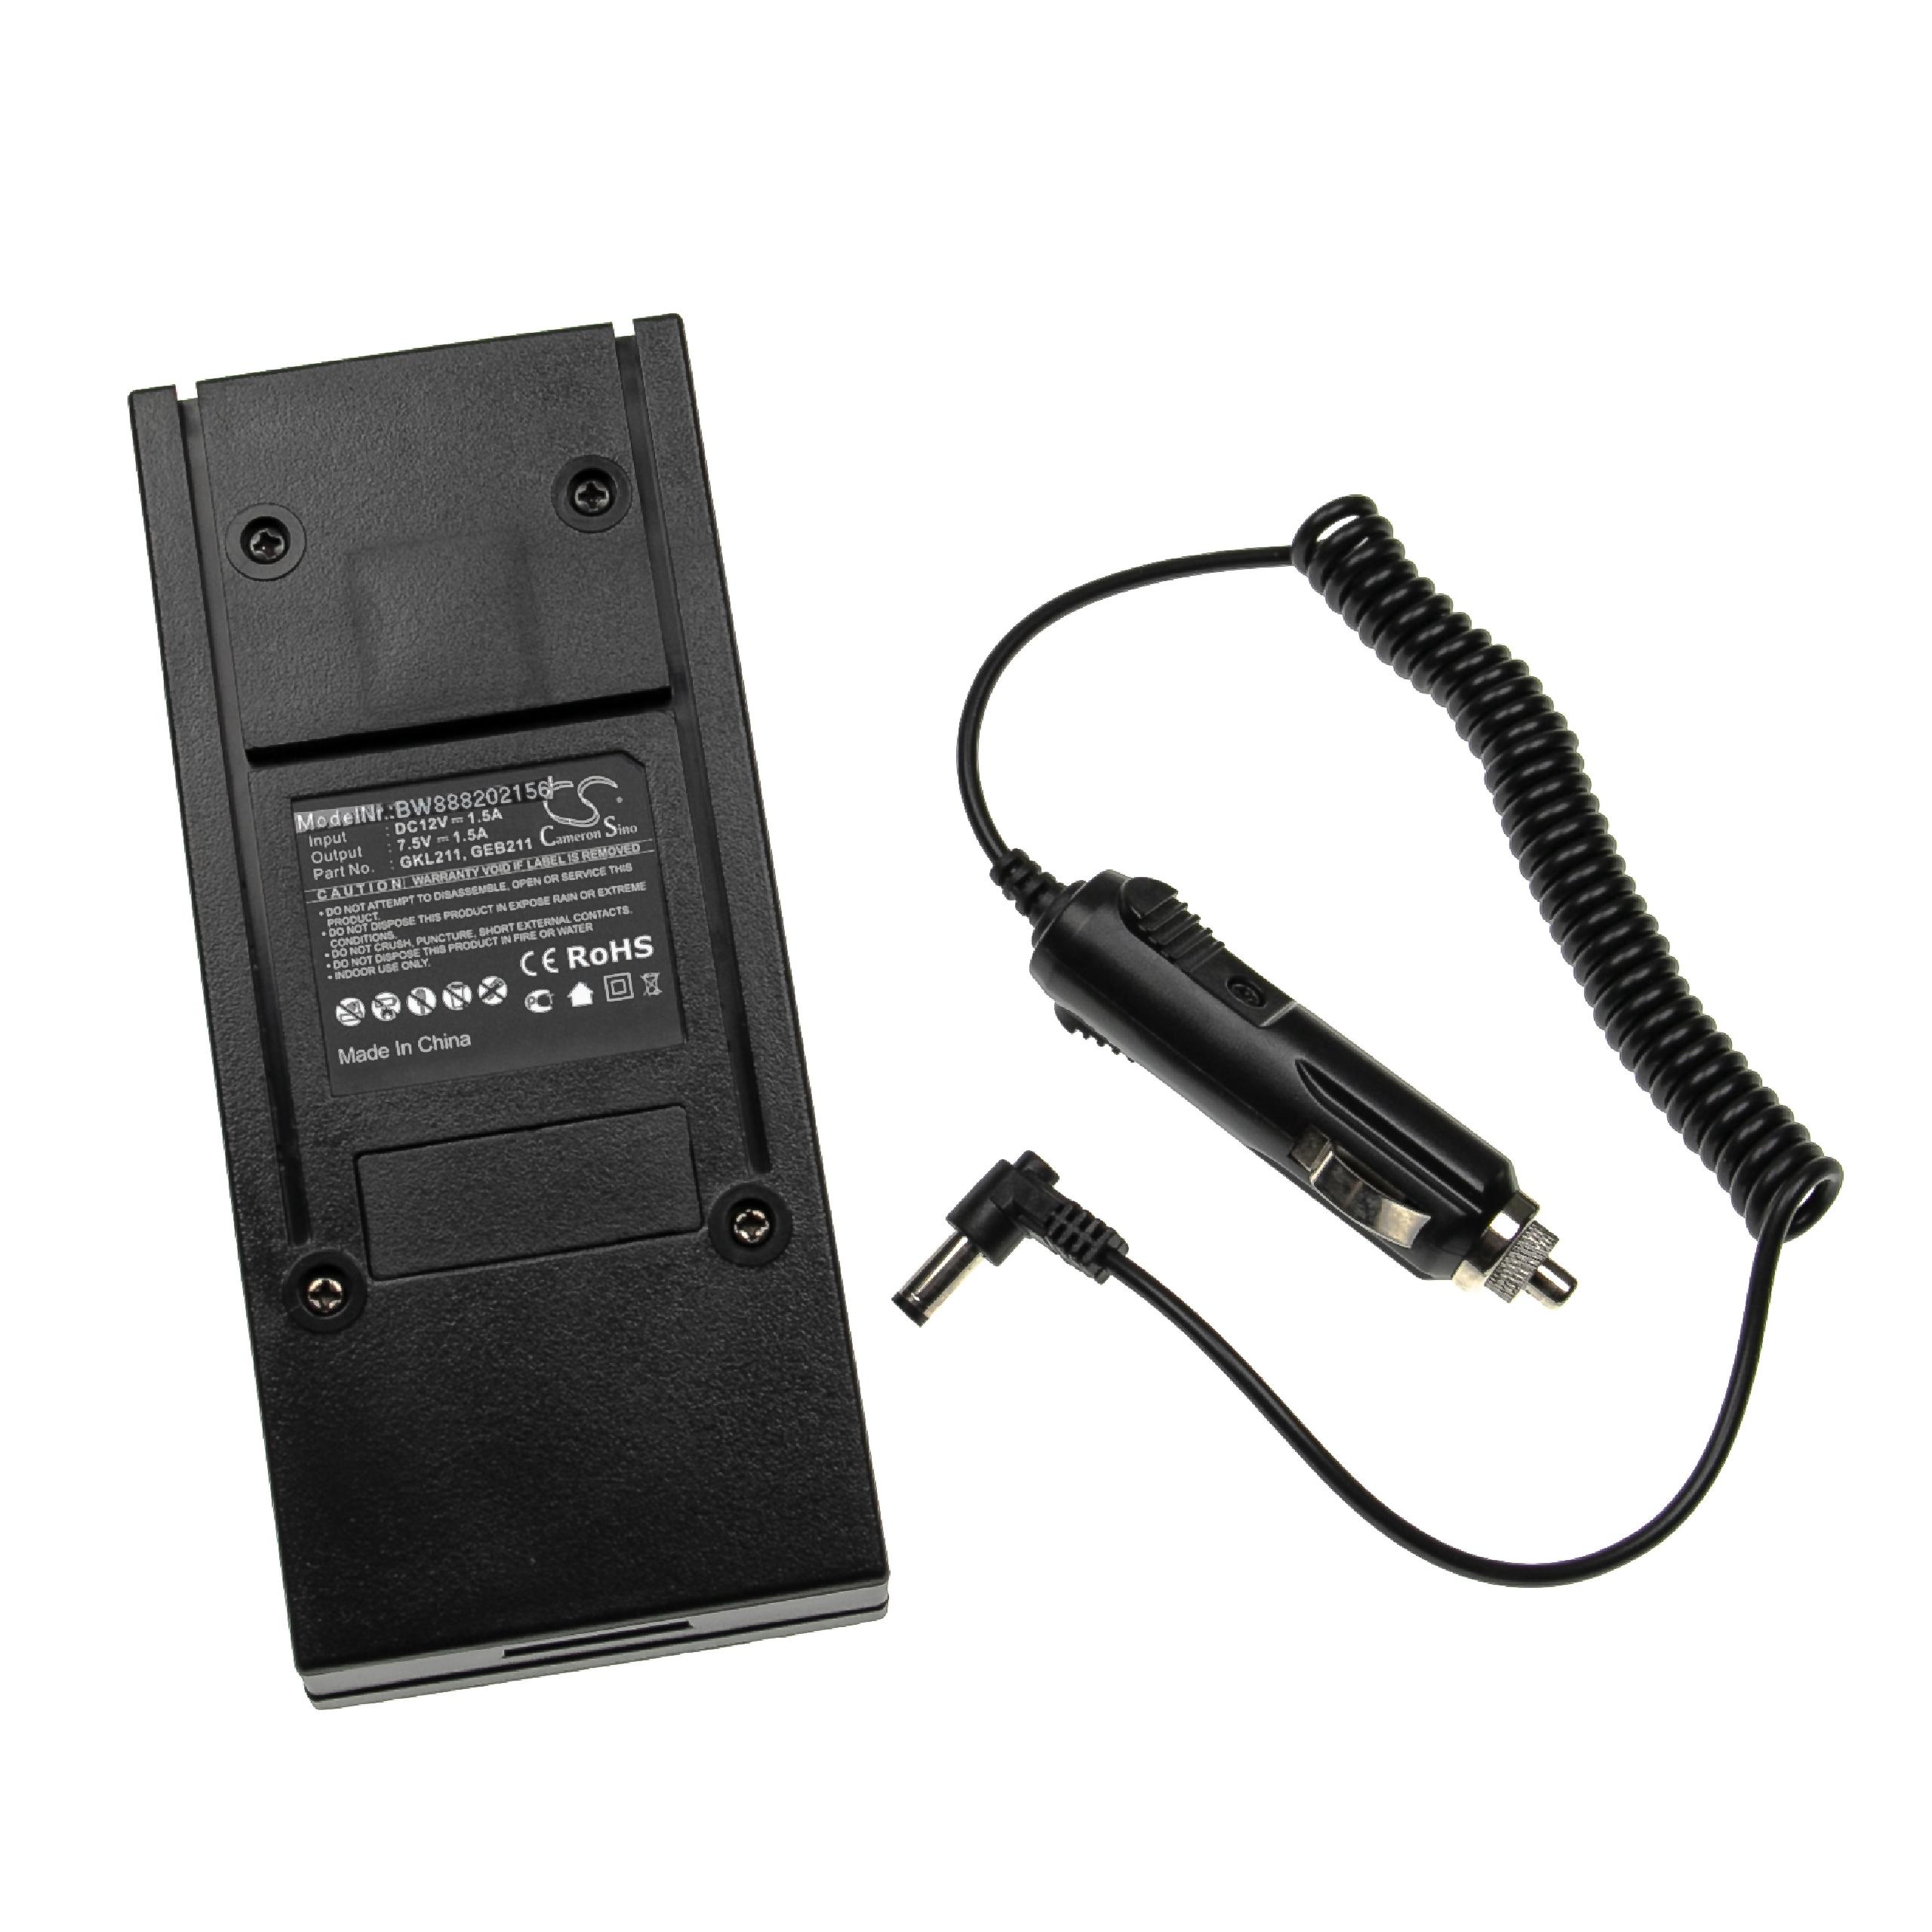 Charger Suitable for Leica Measuring Tool / Battery etc. - Charge Dock + In-Car Cable, 7.5 V / 1.5 A